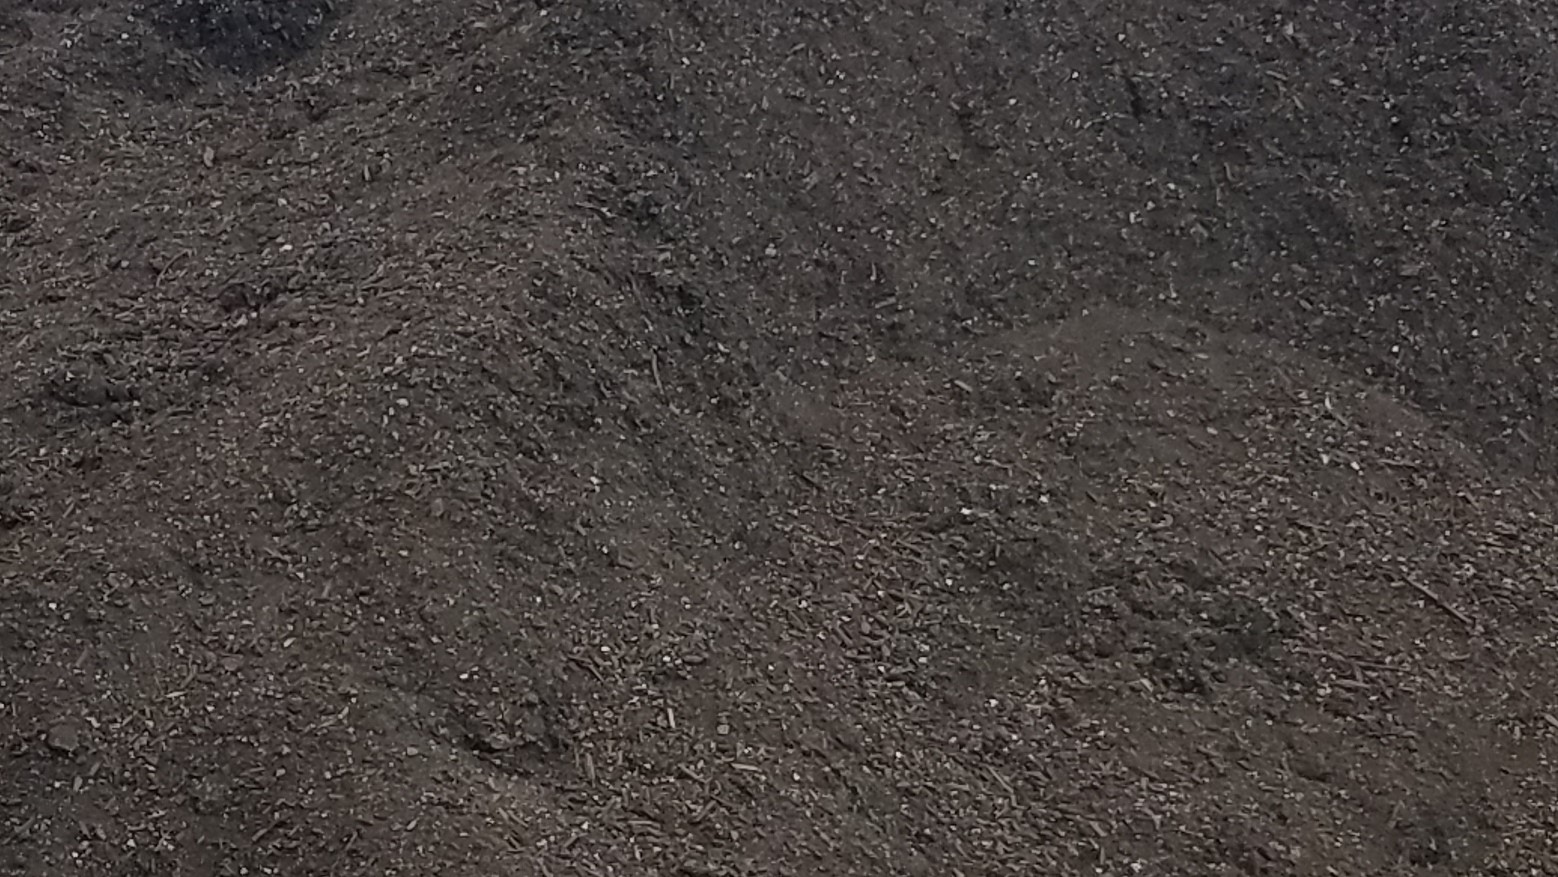 Dirt used in landscaping projects in Twin Falls, ID